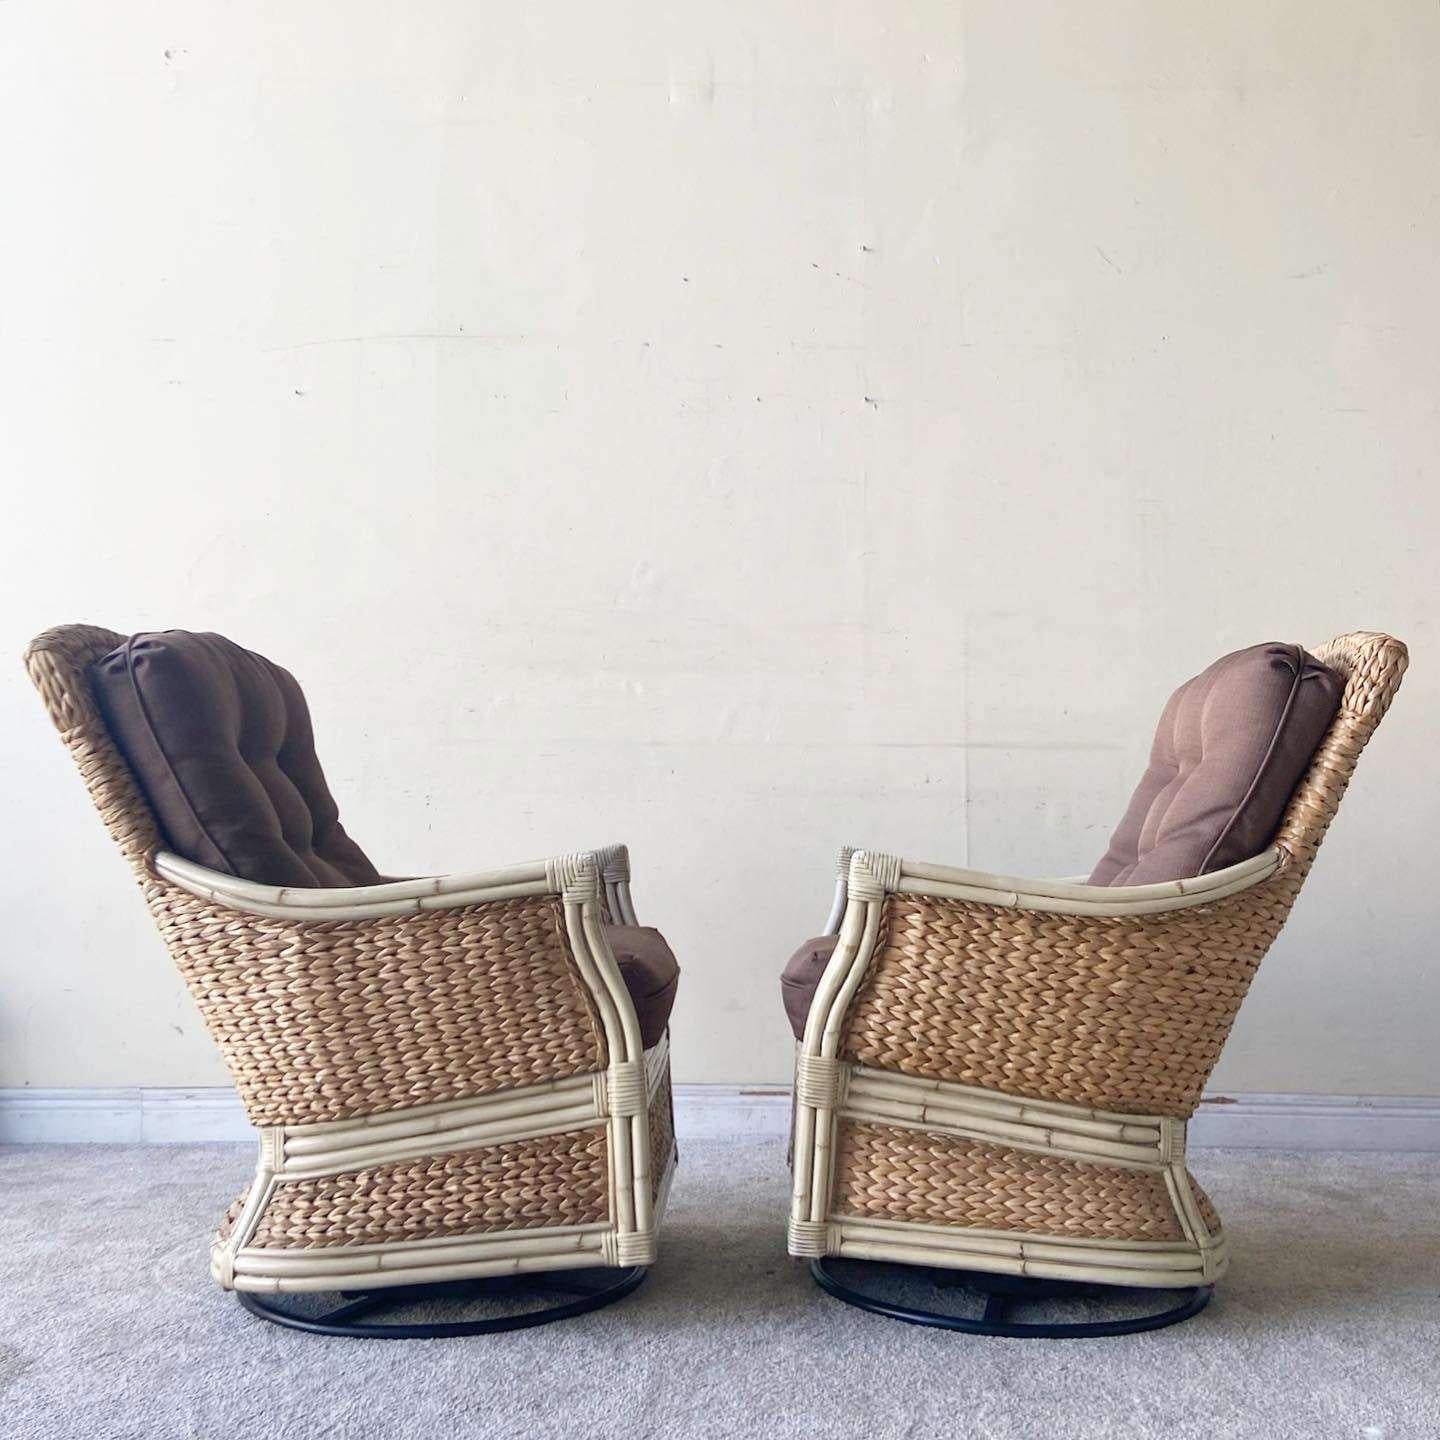 Philippine Boho Chic Bamboo Rattan and Sea Grass Rocking Swivel Chairs For Sale